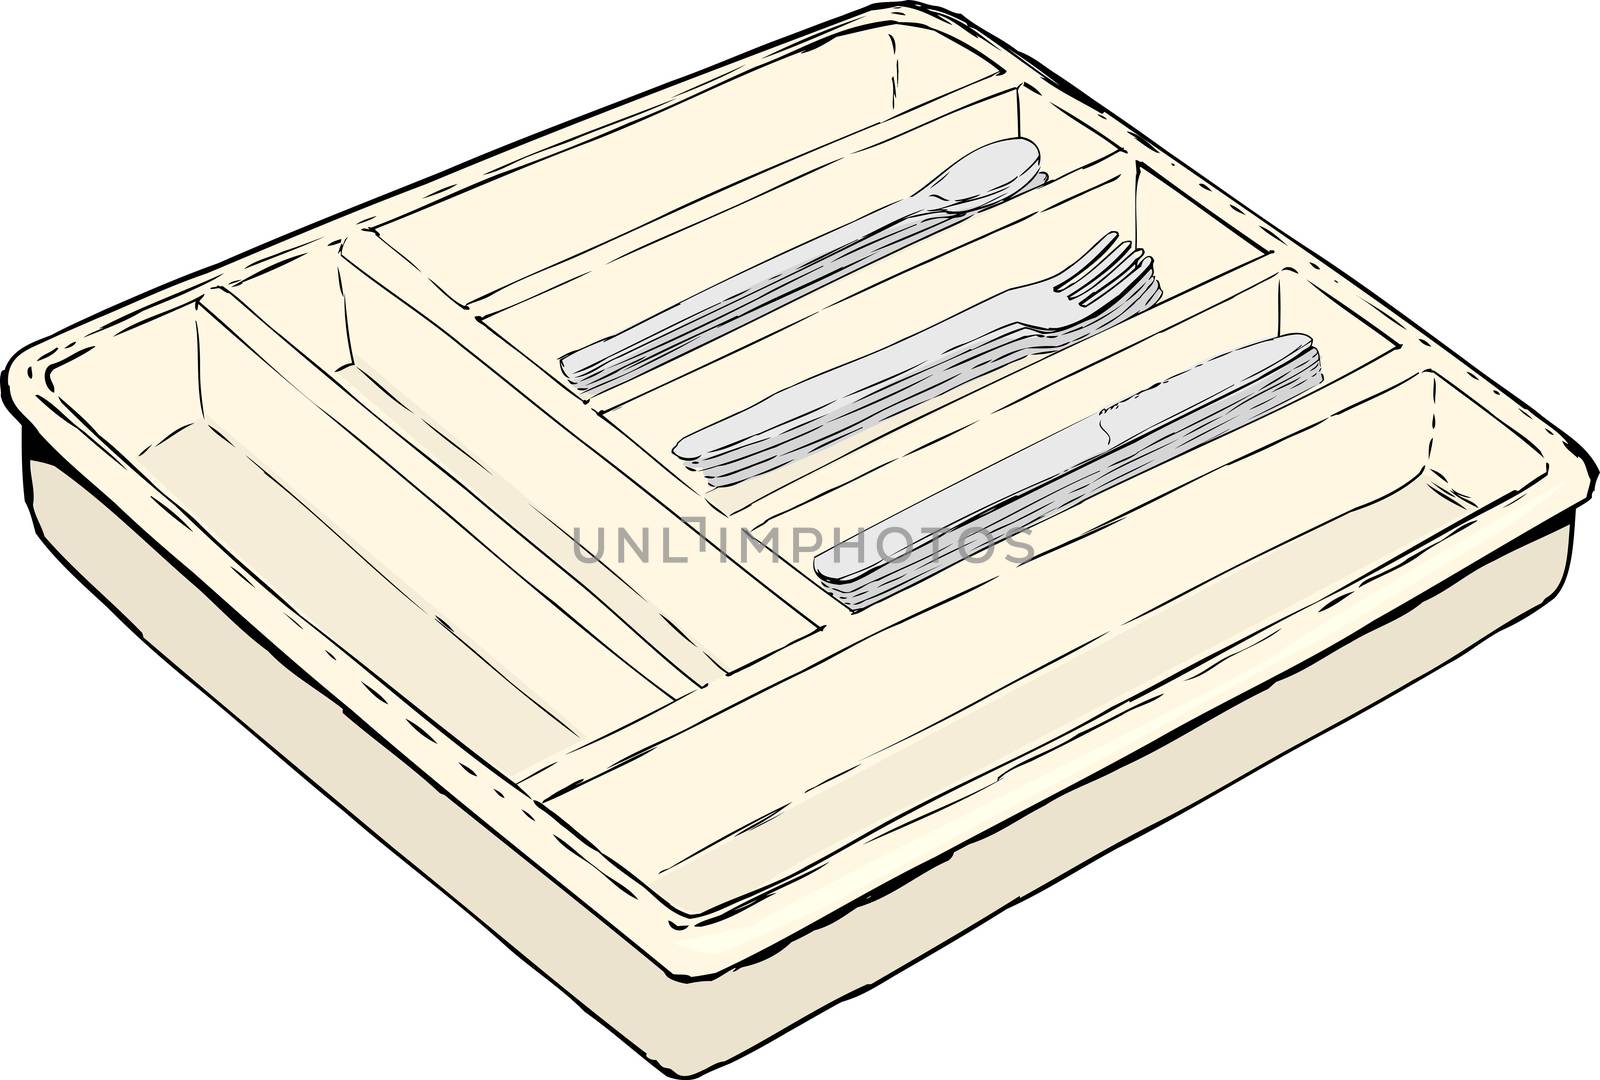 Single isolated rectangular cutlery tray with stacks of spoons, forks and knives over white background